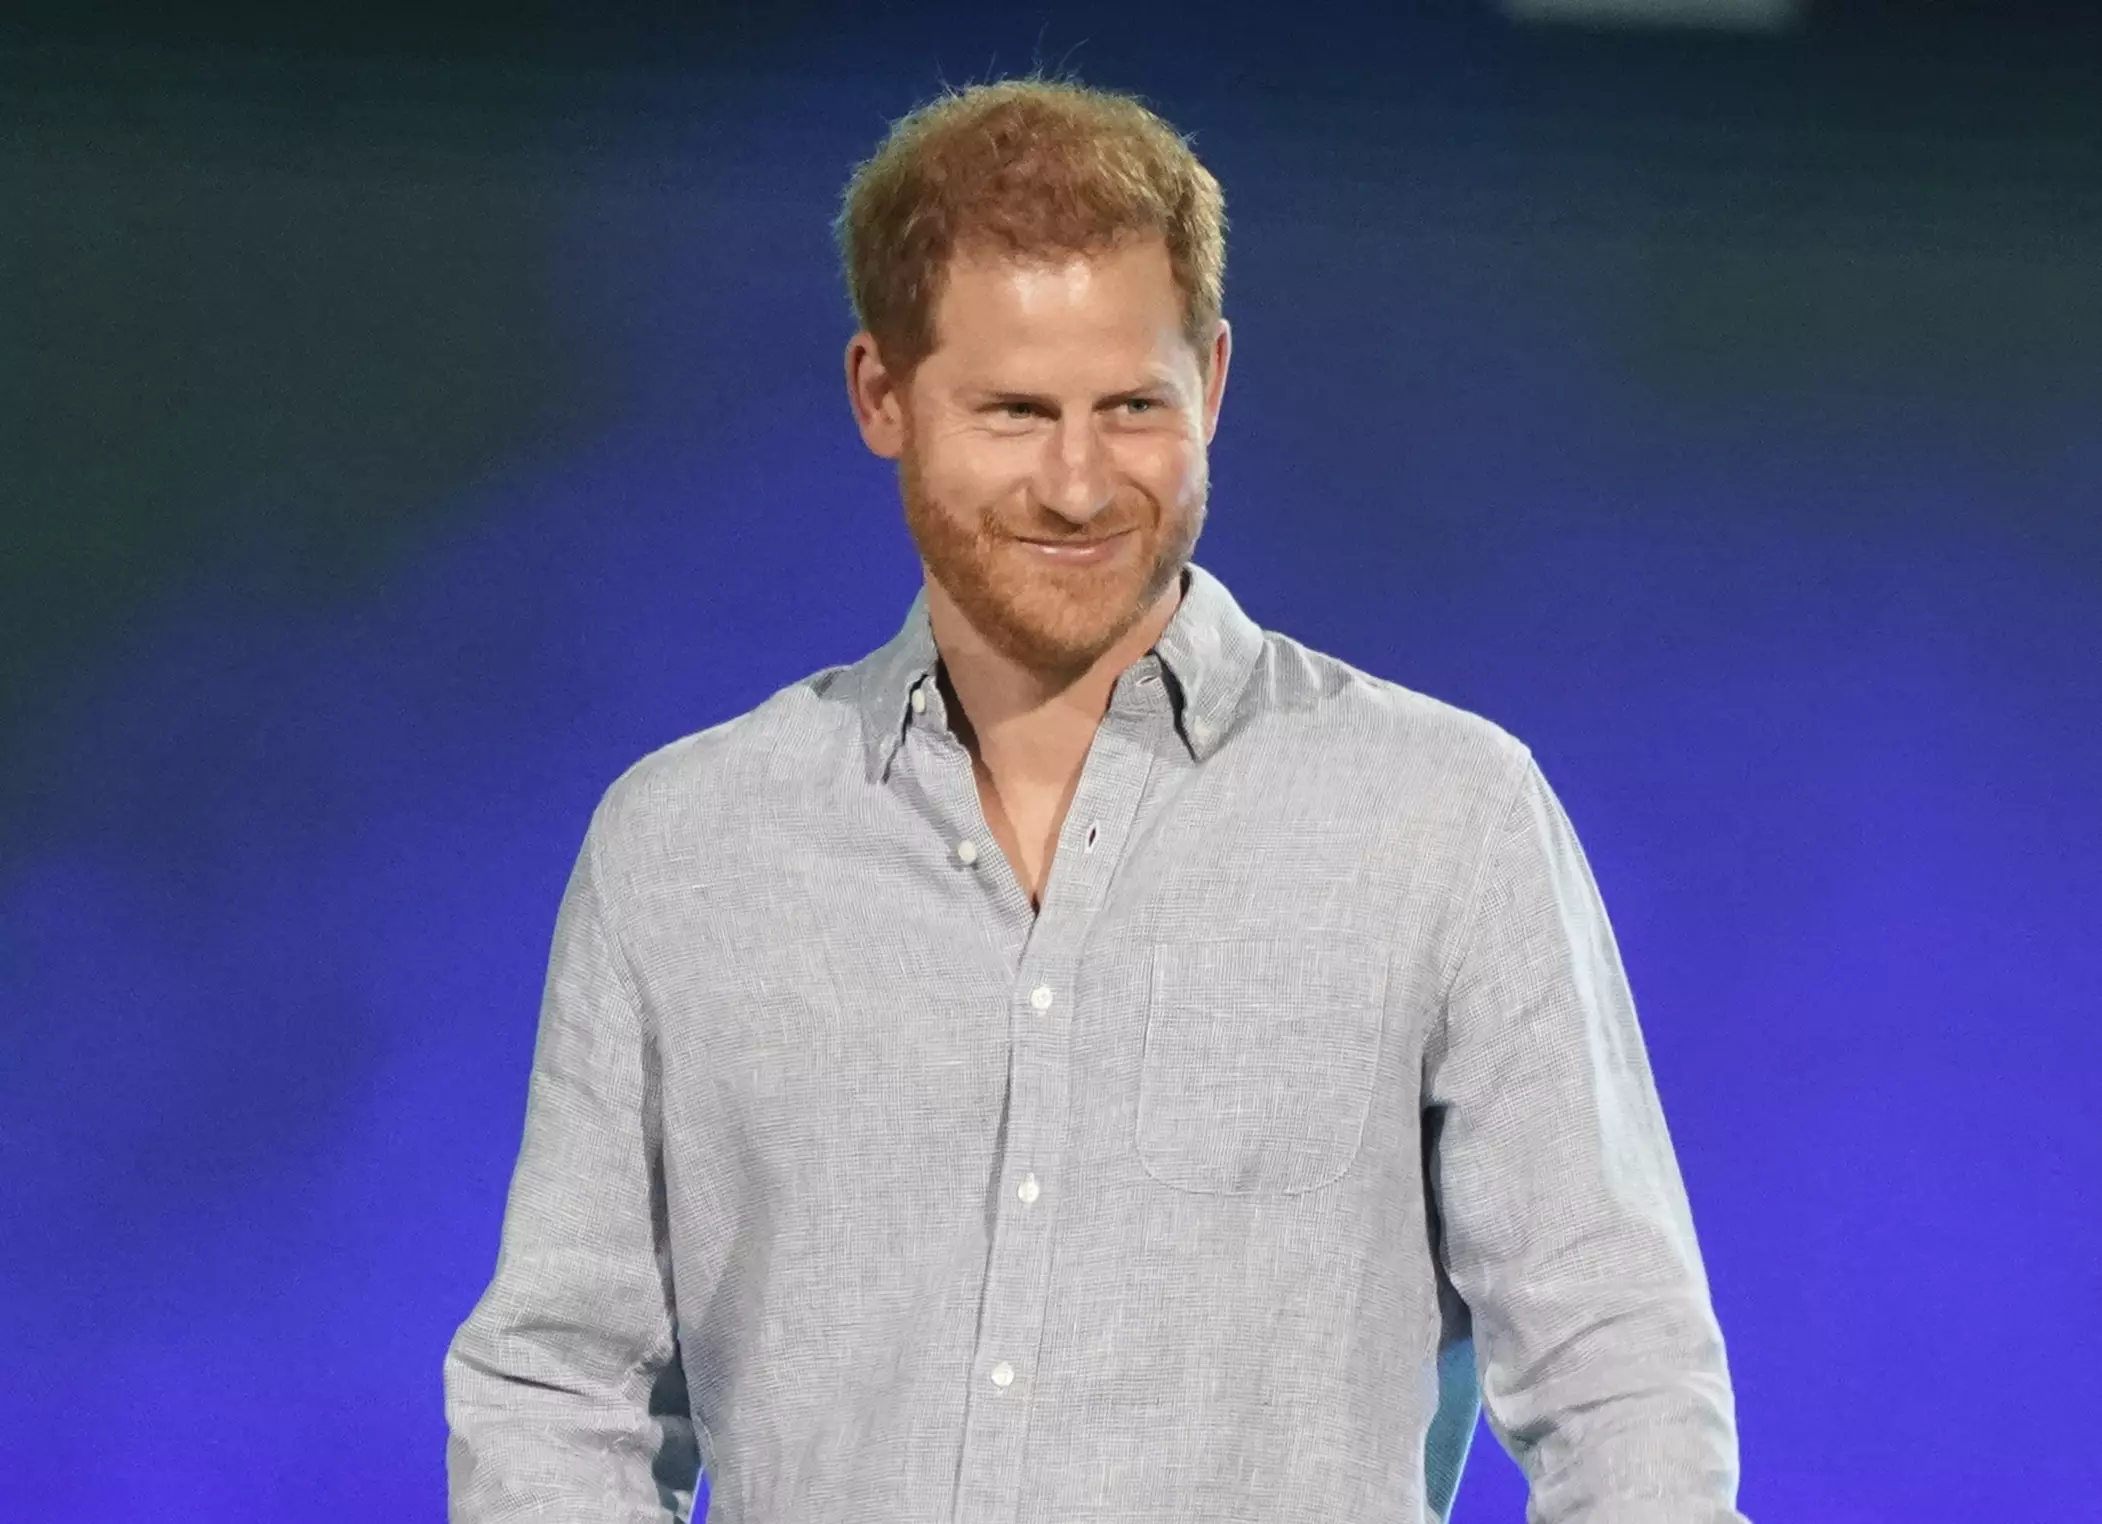 Prince Harry has started a new life in California.